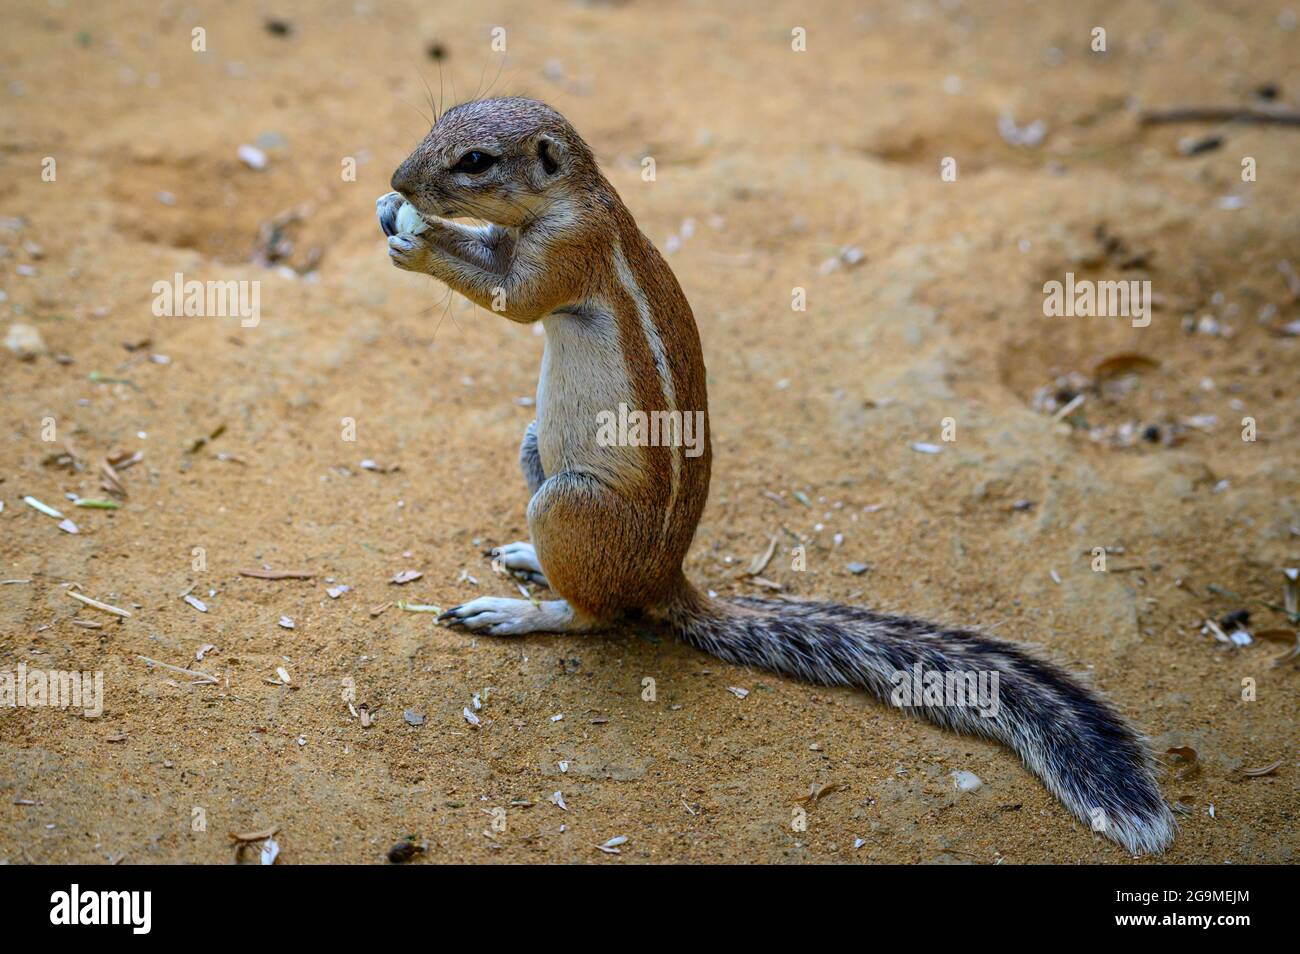 Cape ground squirrel or South African ground squirrel Stock Photo